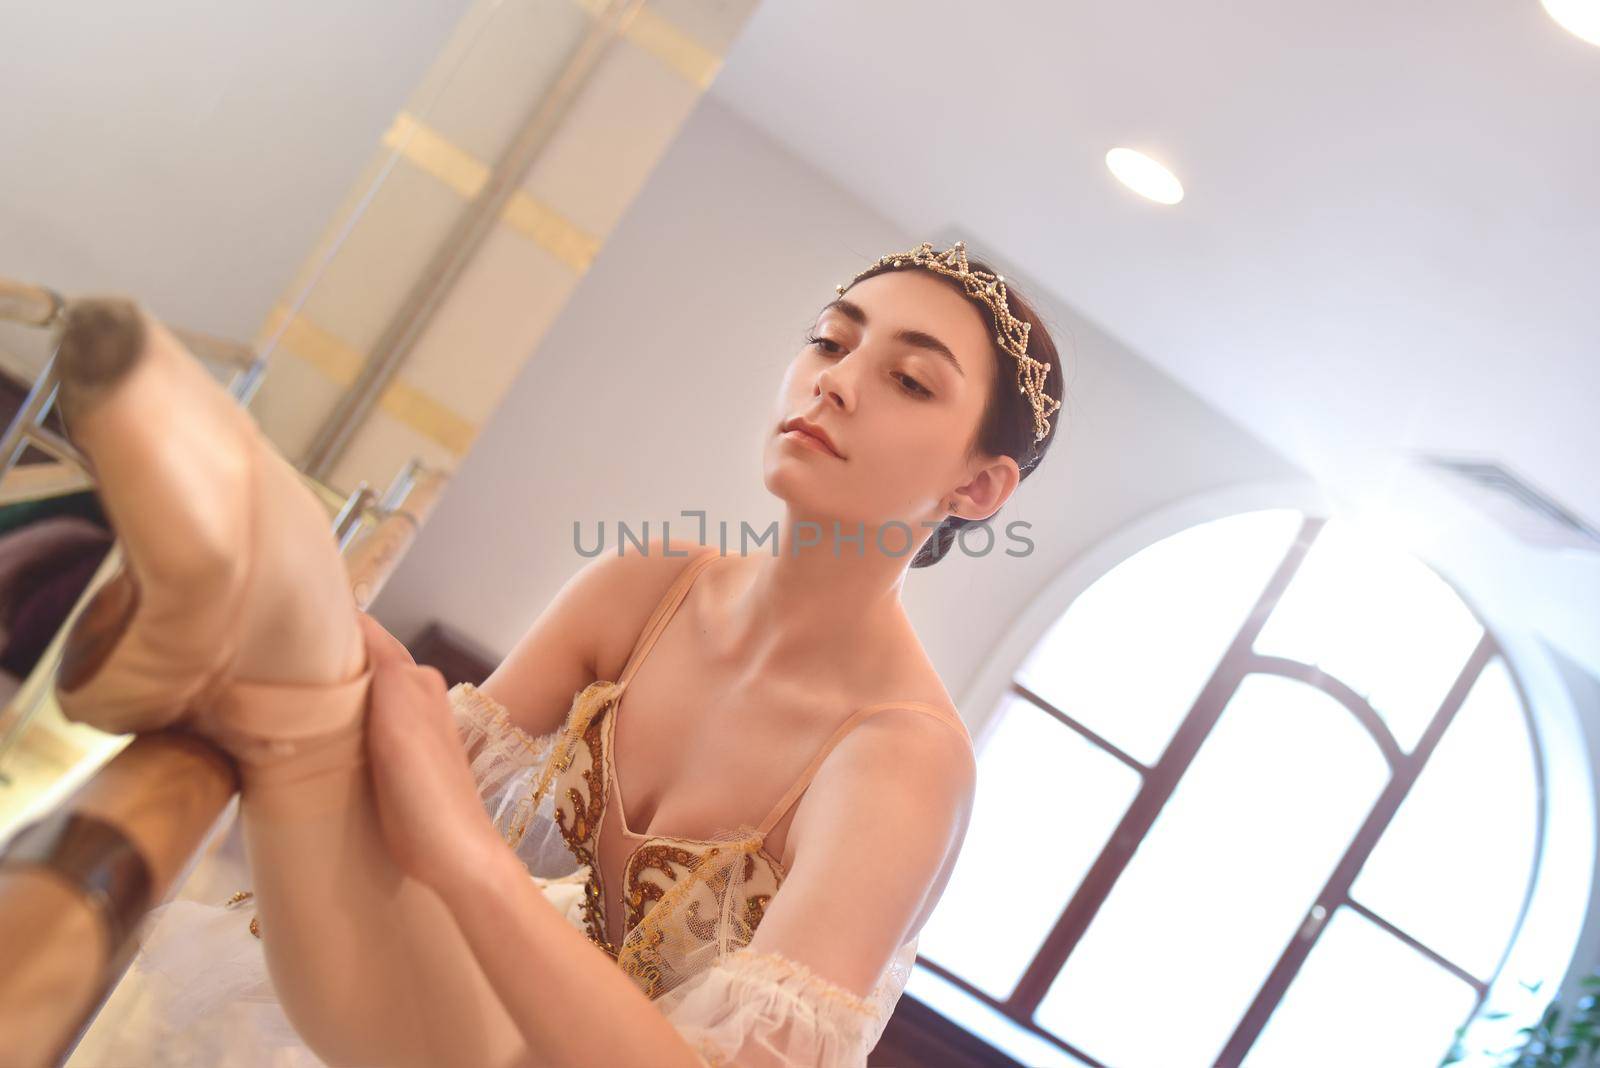 charming Ballerina stretches herself near barre and mirrors in the classroom